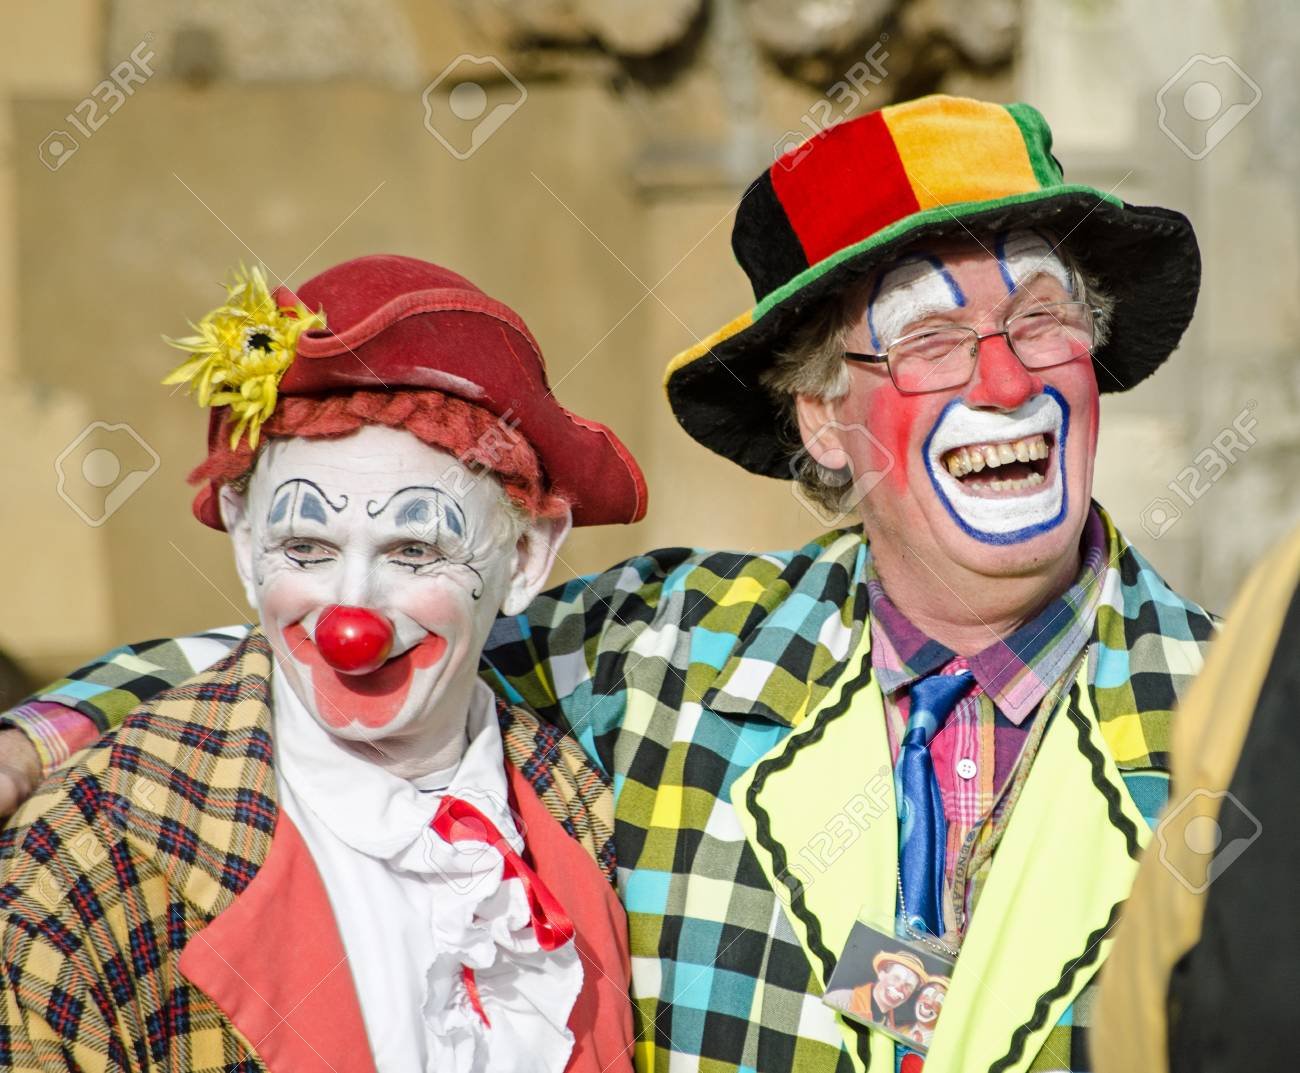 600x495-123573425-london-uk-february-7-2016-two-clowns-sharing-a-joke-ahead-of-the-annual-church-service-in-memory-of-1.jpg